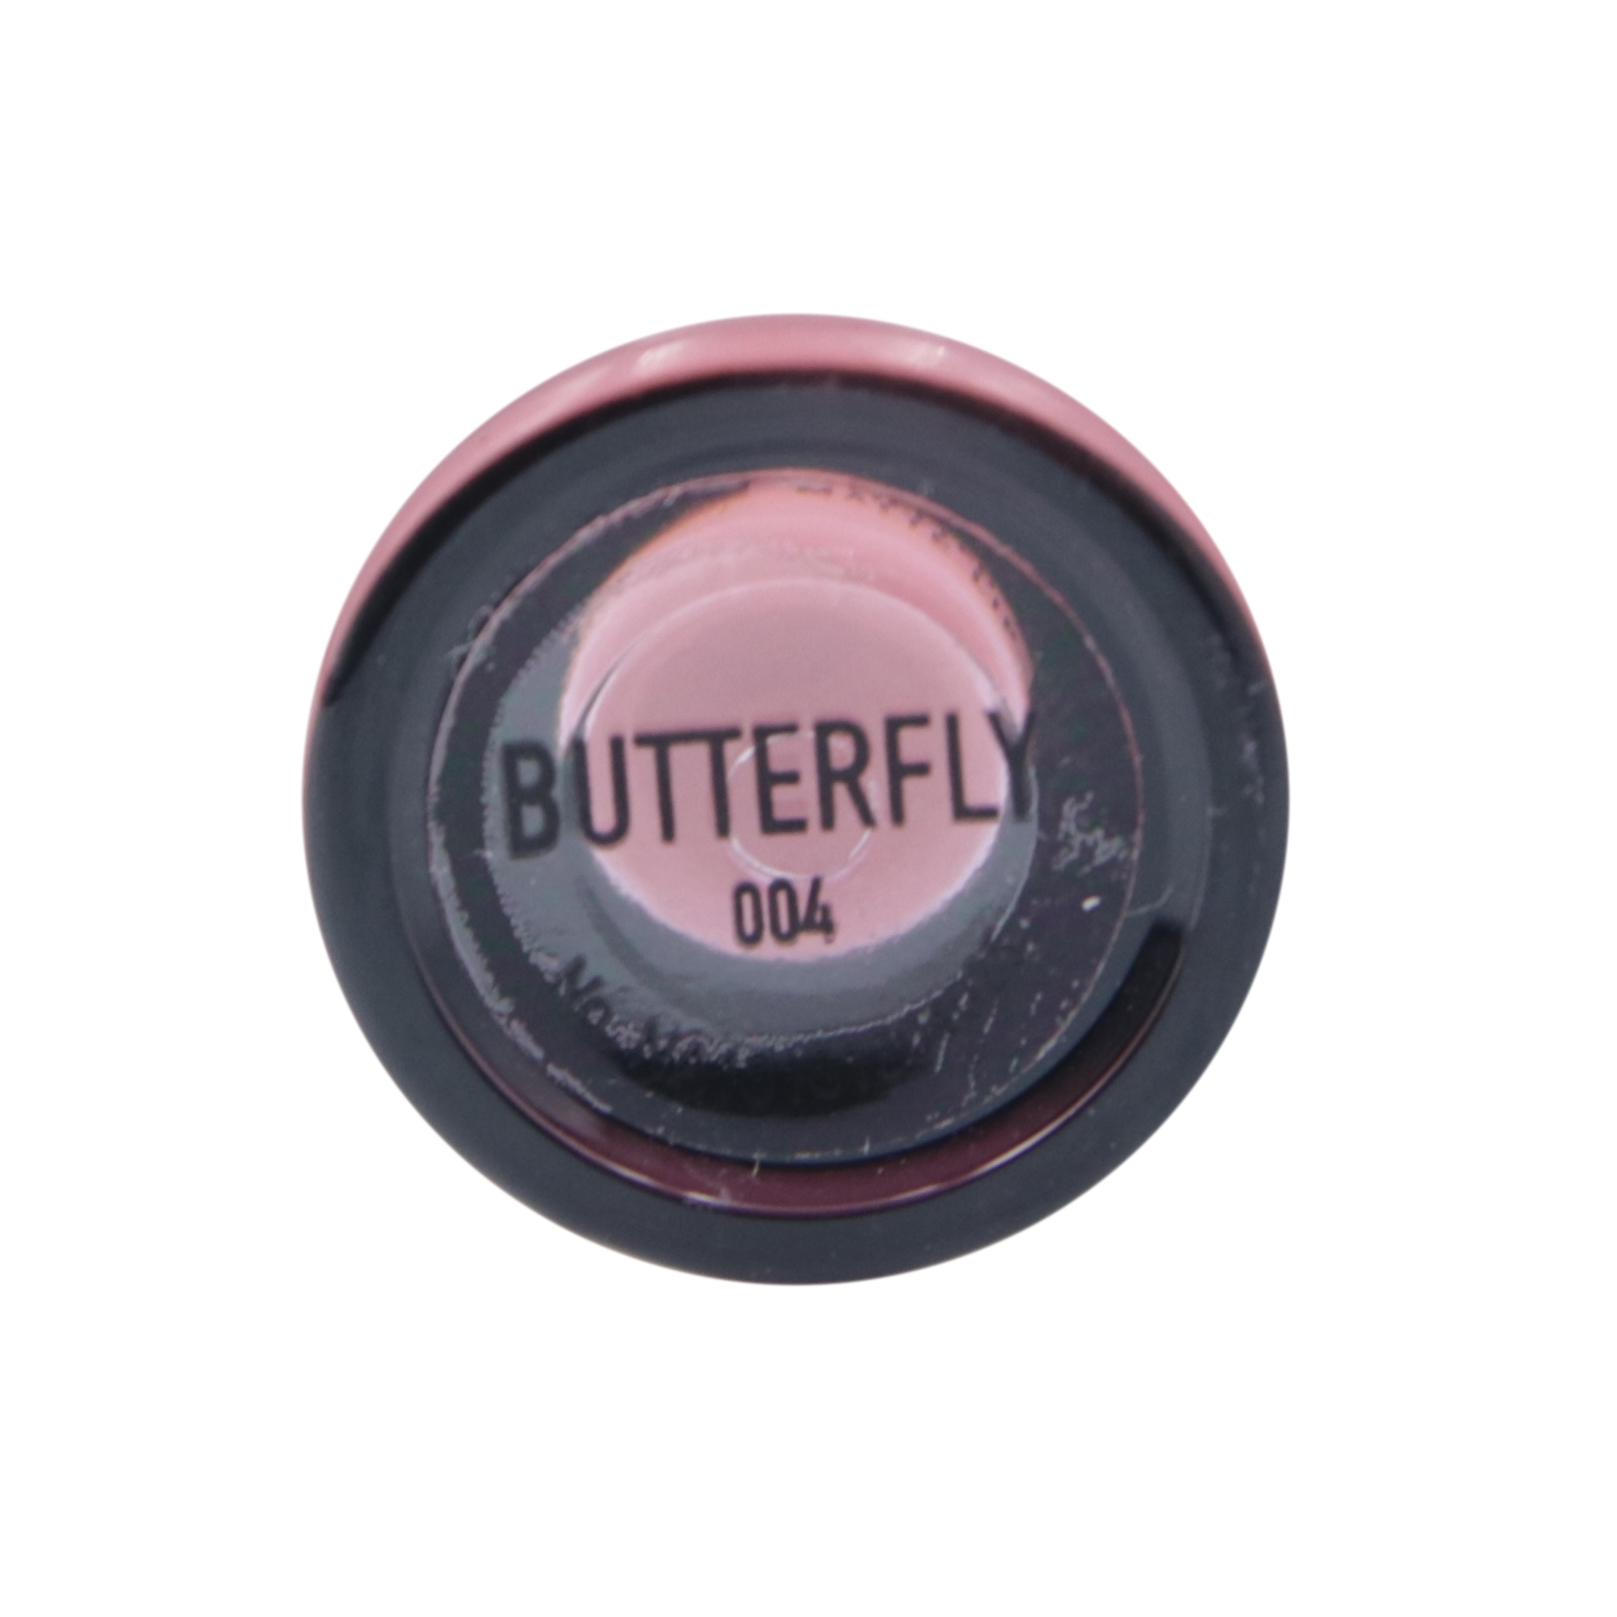 Goban Melted Matte Lip Butterfly Lips